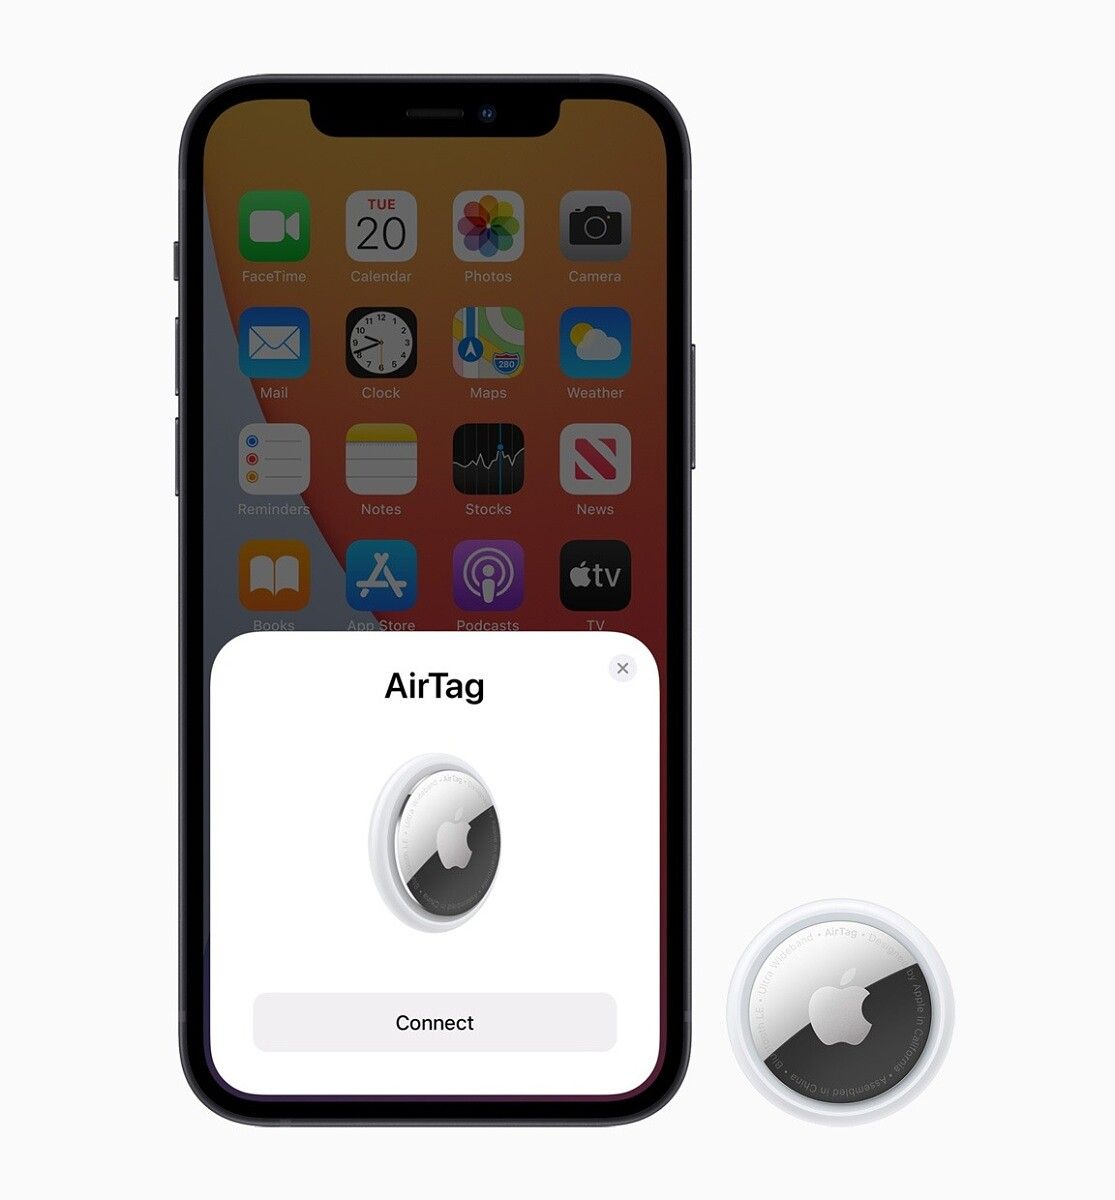 AirTag is a Find My network tracker that offers many features to ensure you don't lose your items.